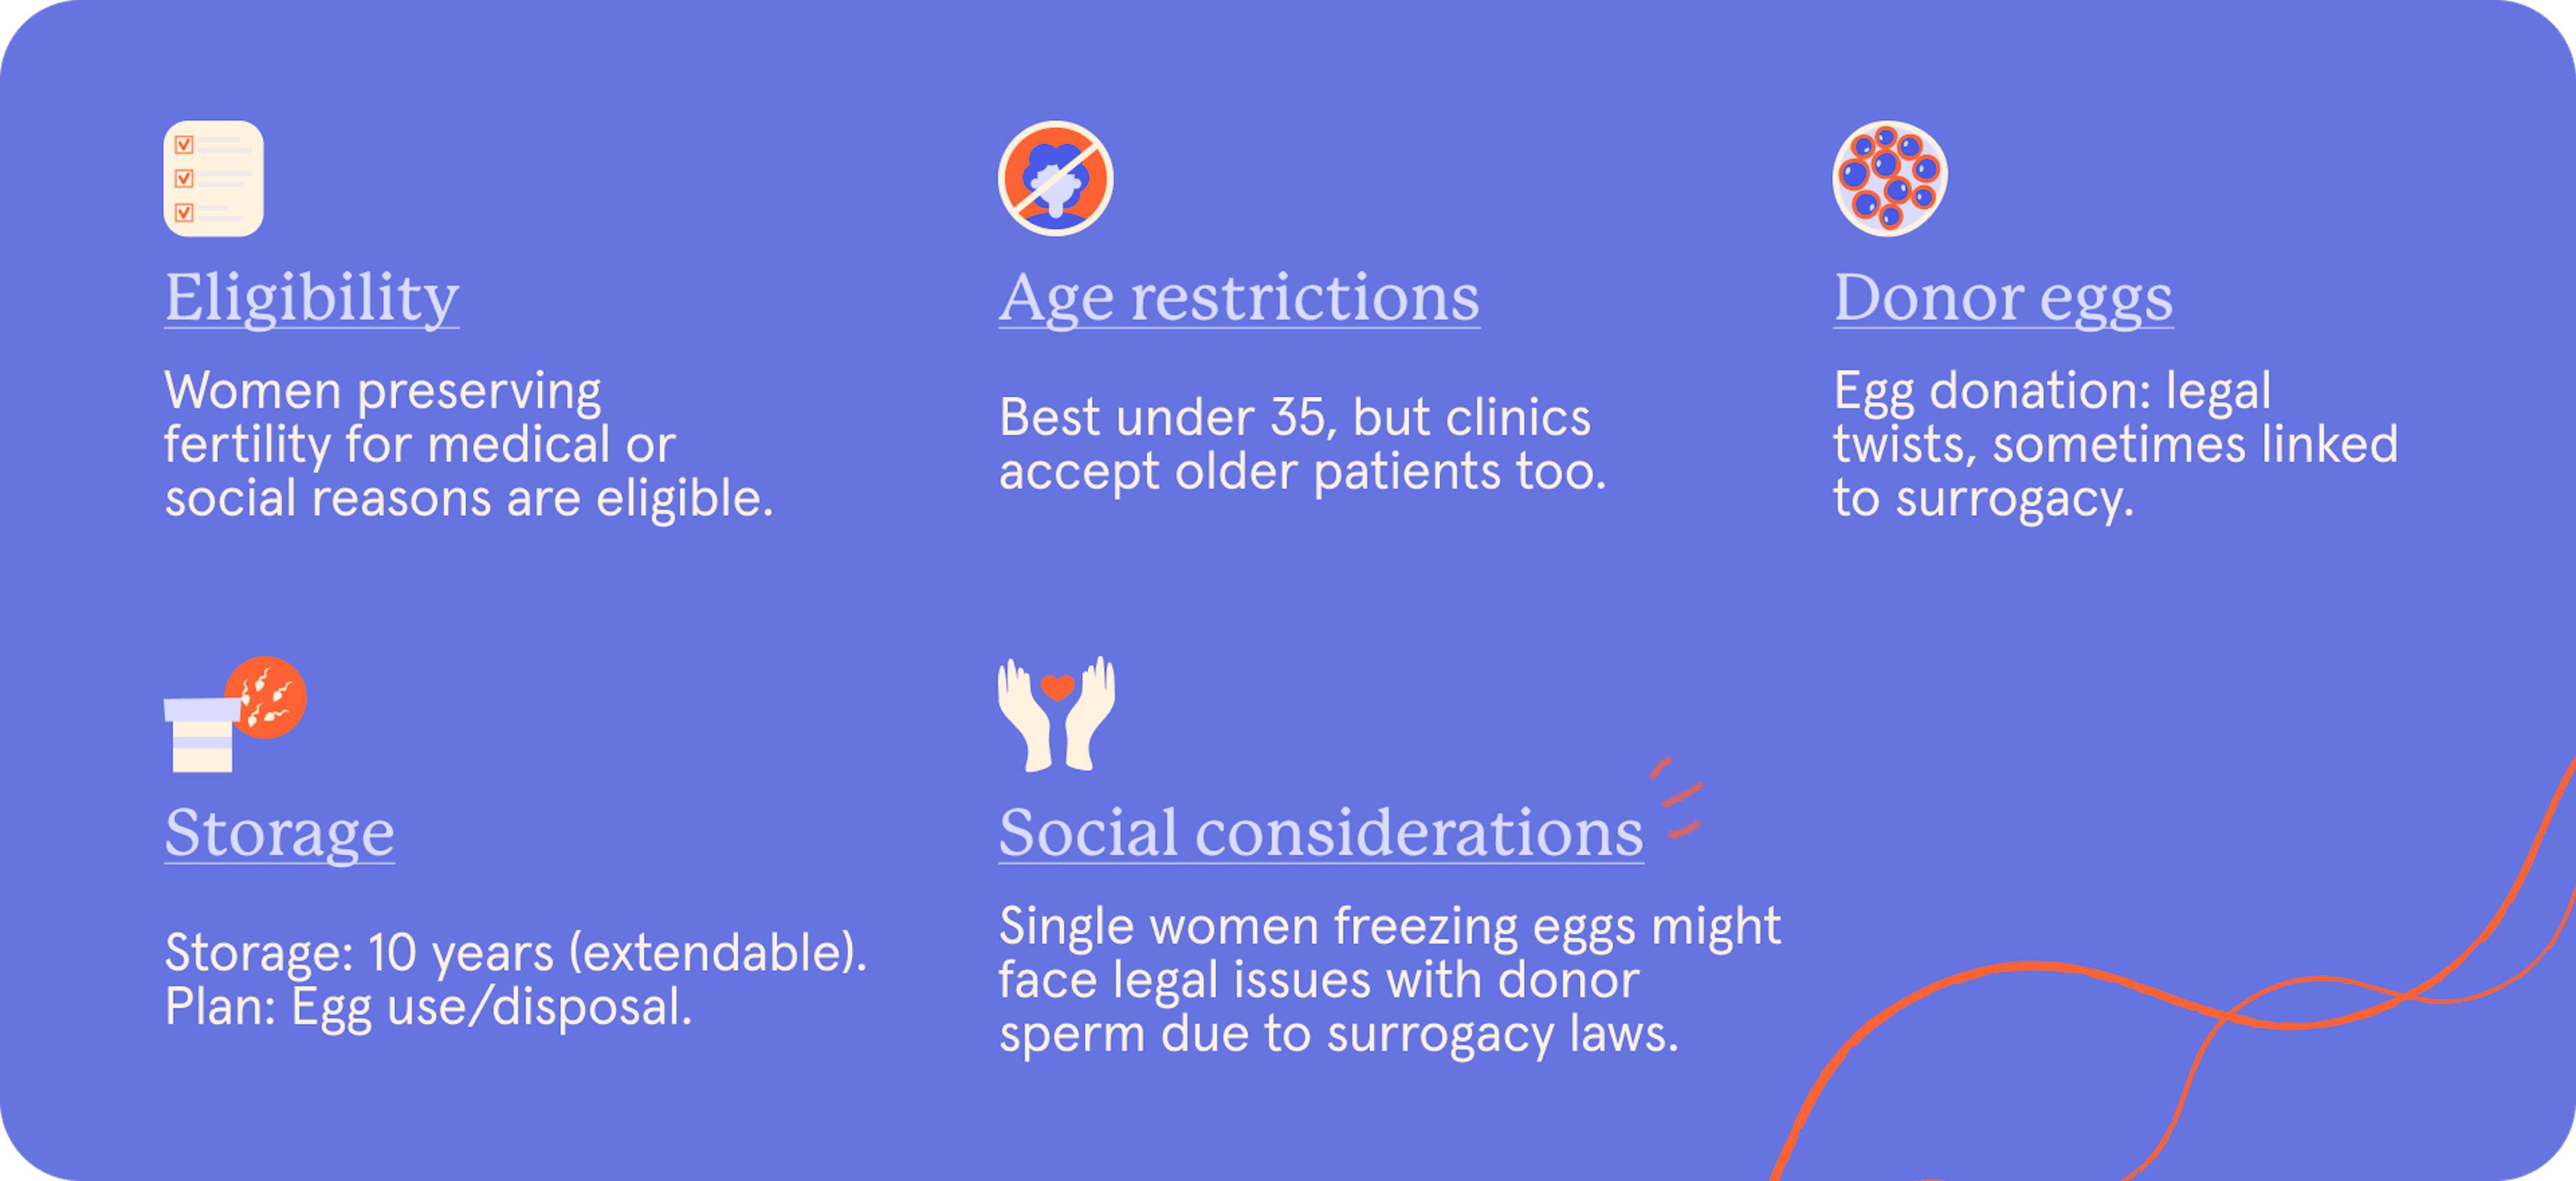 A snapshot of the legal guidelines around egg freezing